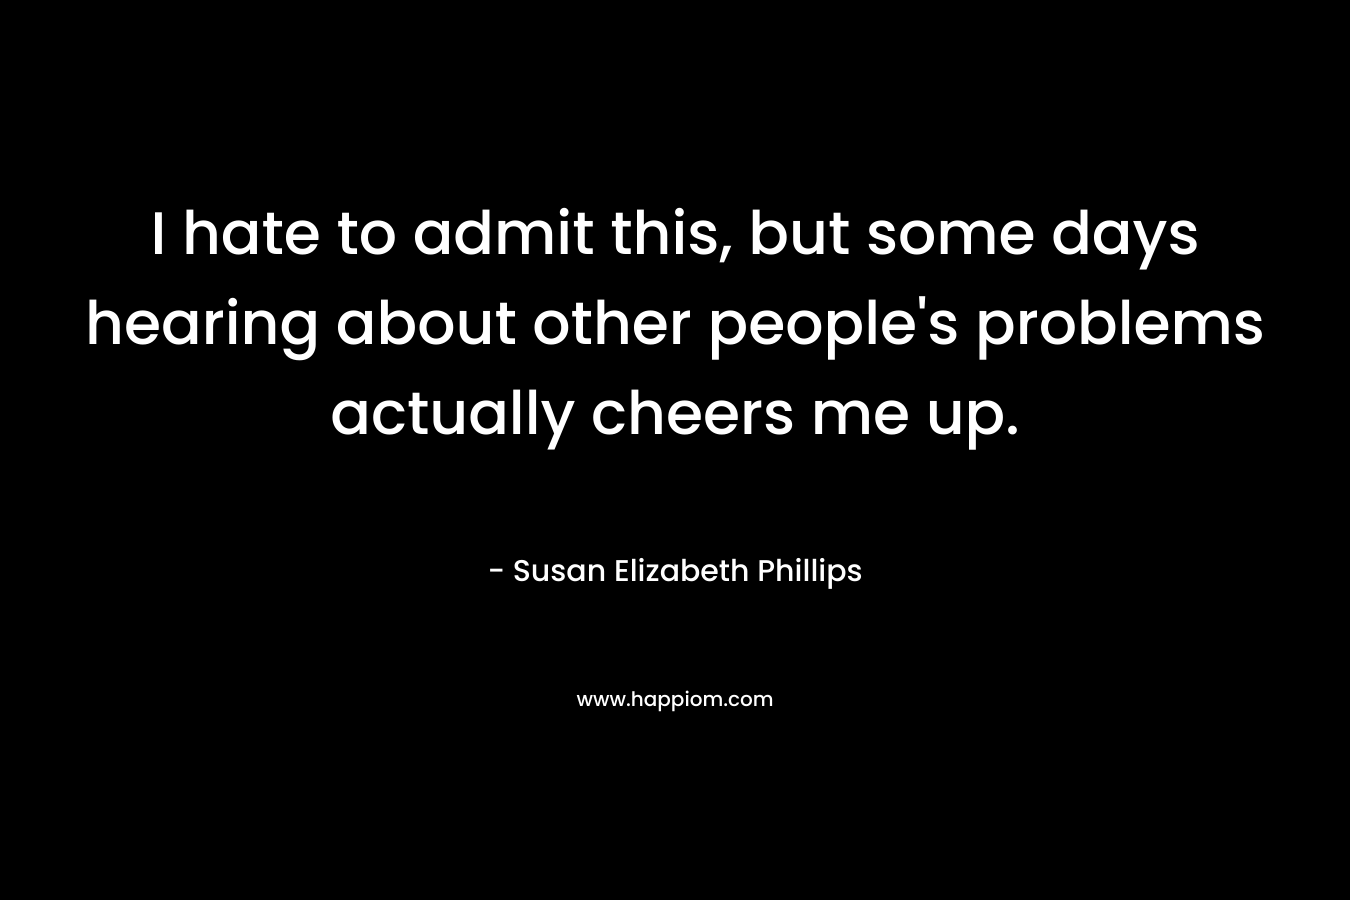 I hate to admit this, but some days hearing about other people’s problems actually cheers me up. – Susan Elizabeth Phillips